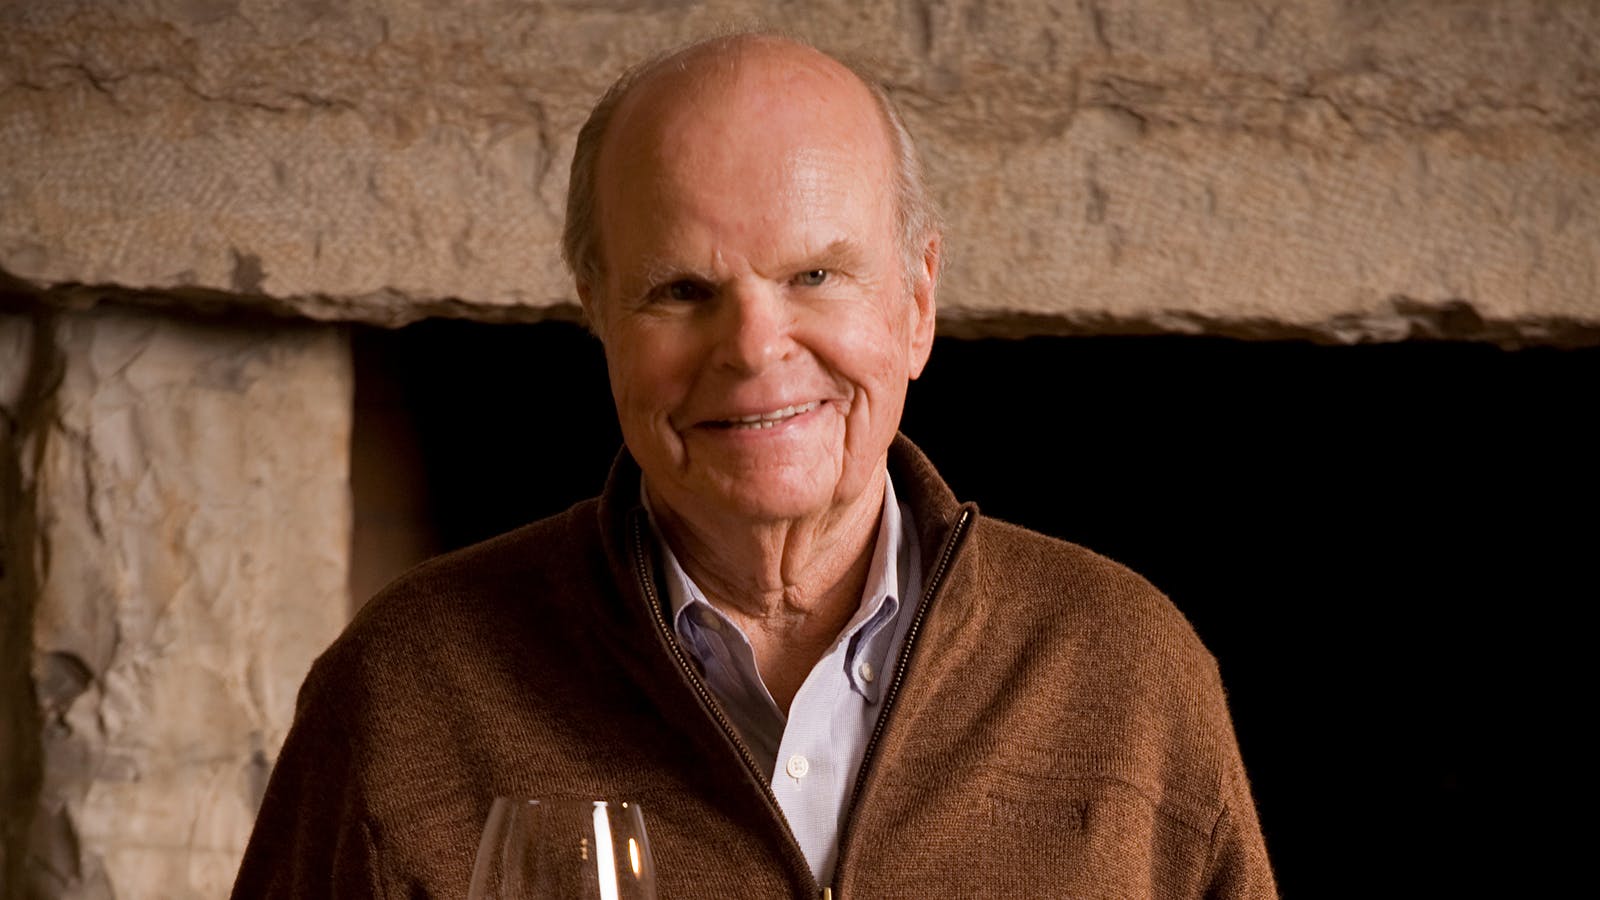 Raymond Duncan, Cofounder of Napa Wine Producers Silver Oak and Twomey Cellars, Dies at 84